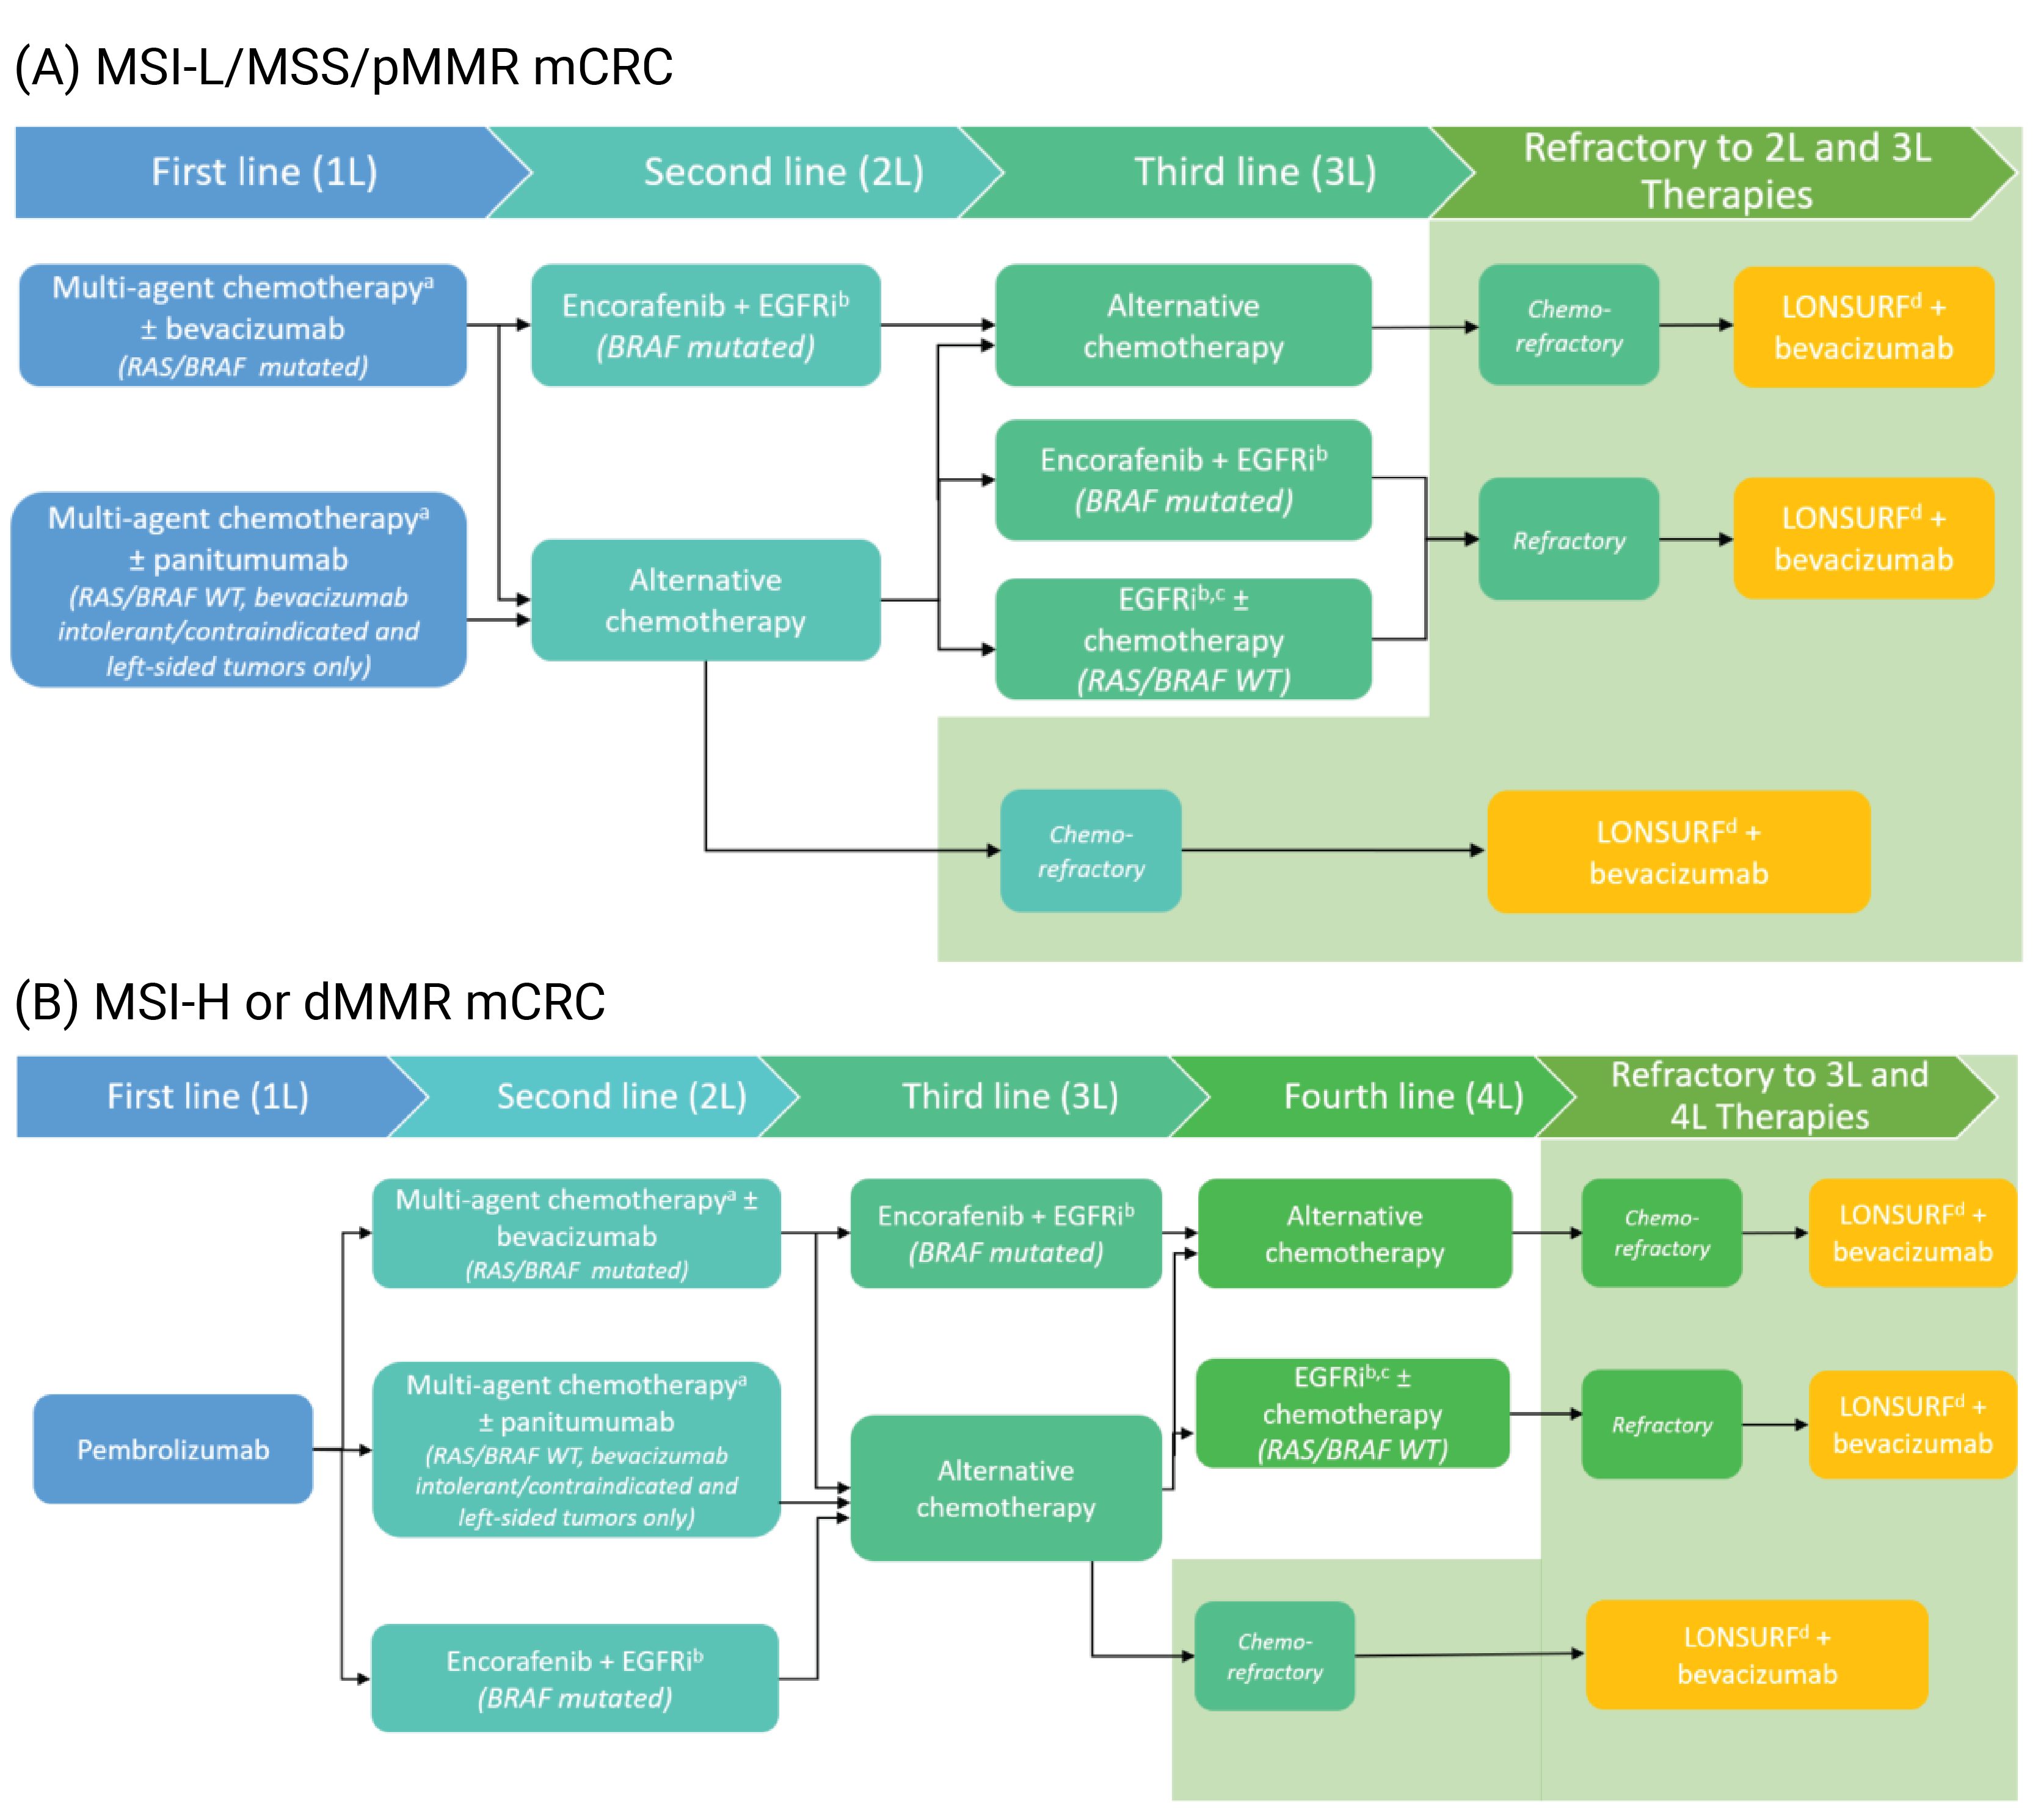 Proposed treatment/funding algorithm for (A) patients with MSI-L/MSS/pMMR mCRC from first-line to second-line, to third-line, and refractory to second- and third-line therapies, and (B) patients with MSI-H or dMMR mCRC from first-line to second-line, to third-line, to fourth-line, and refractory to third- line and fourth-line therapies.